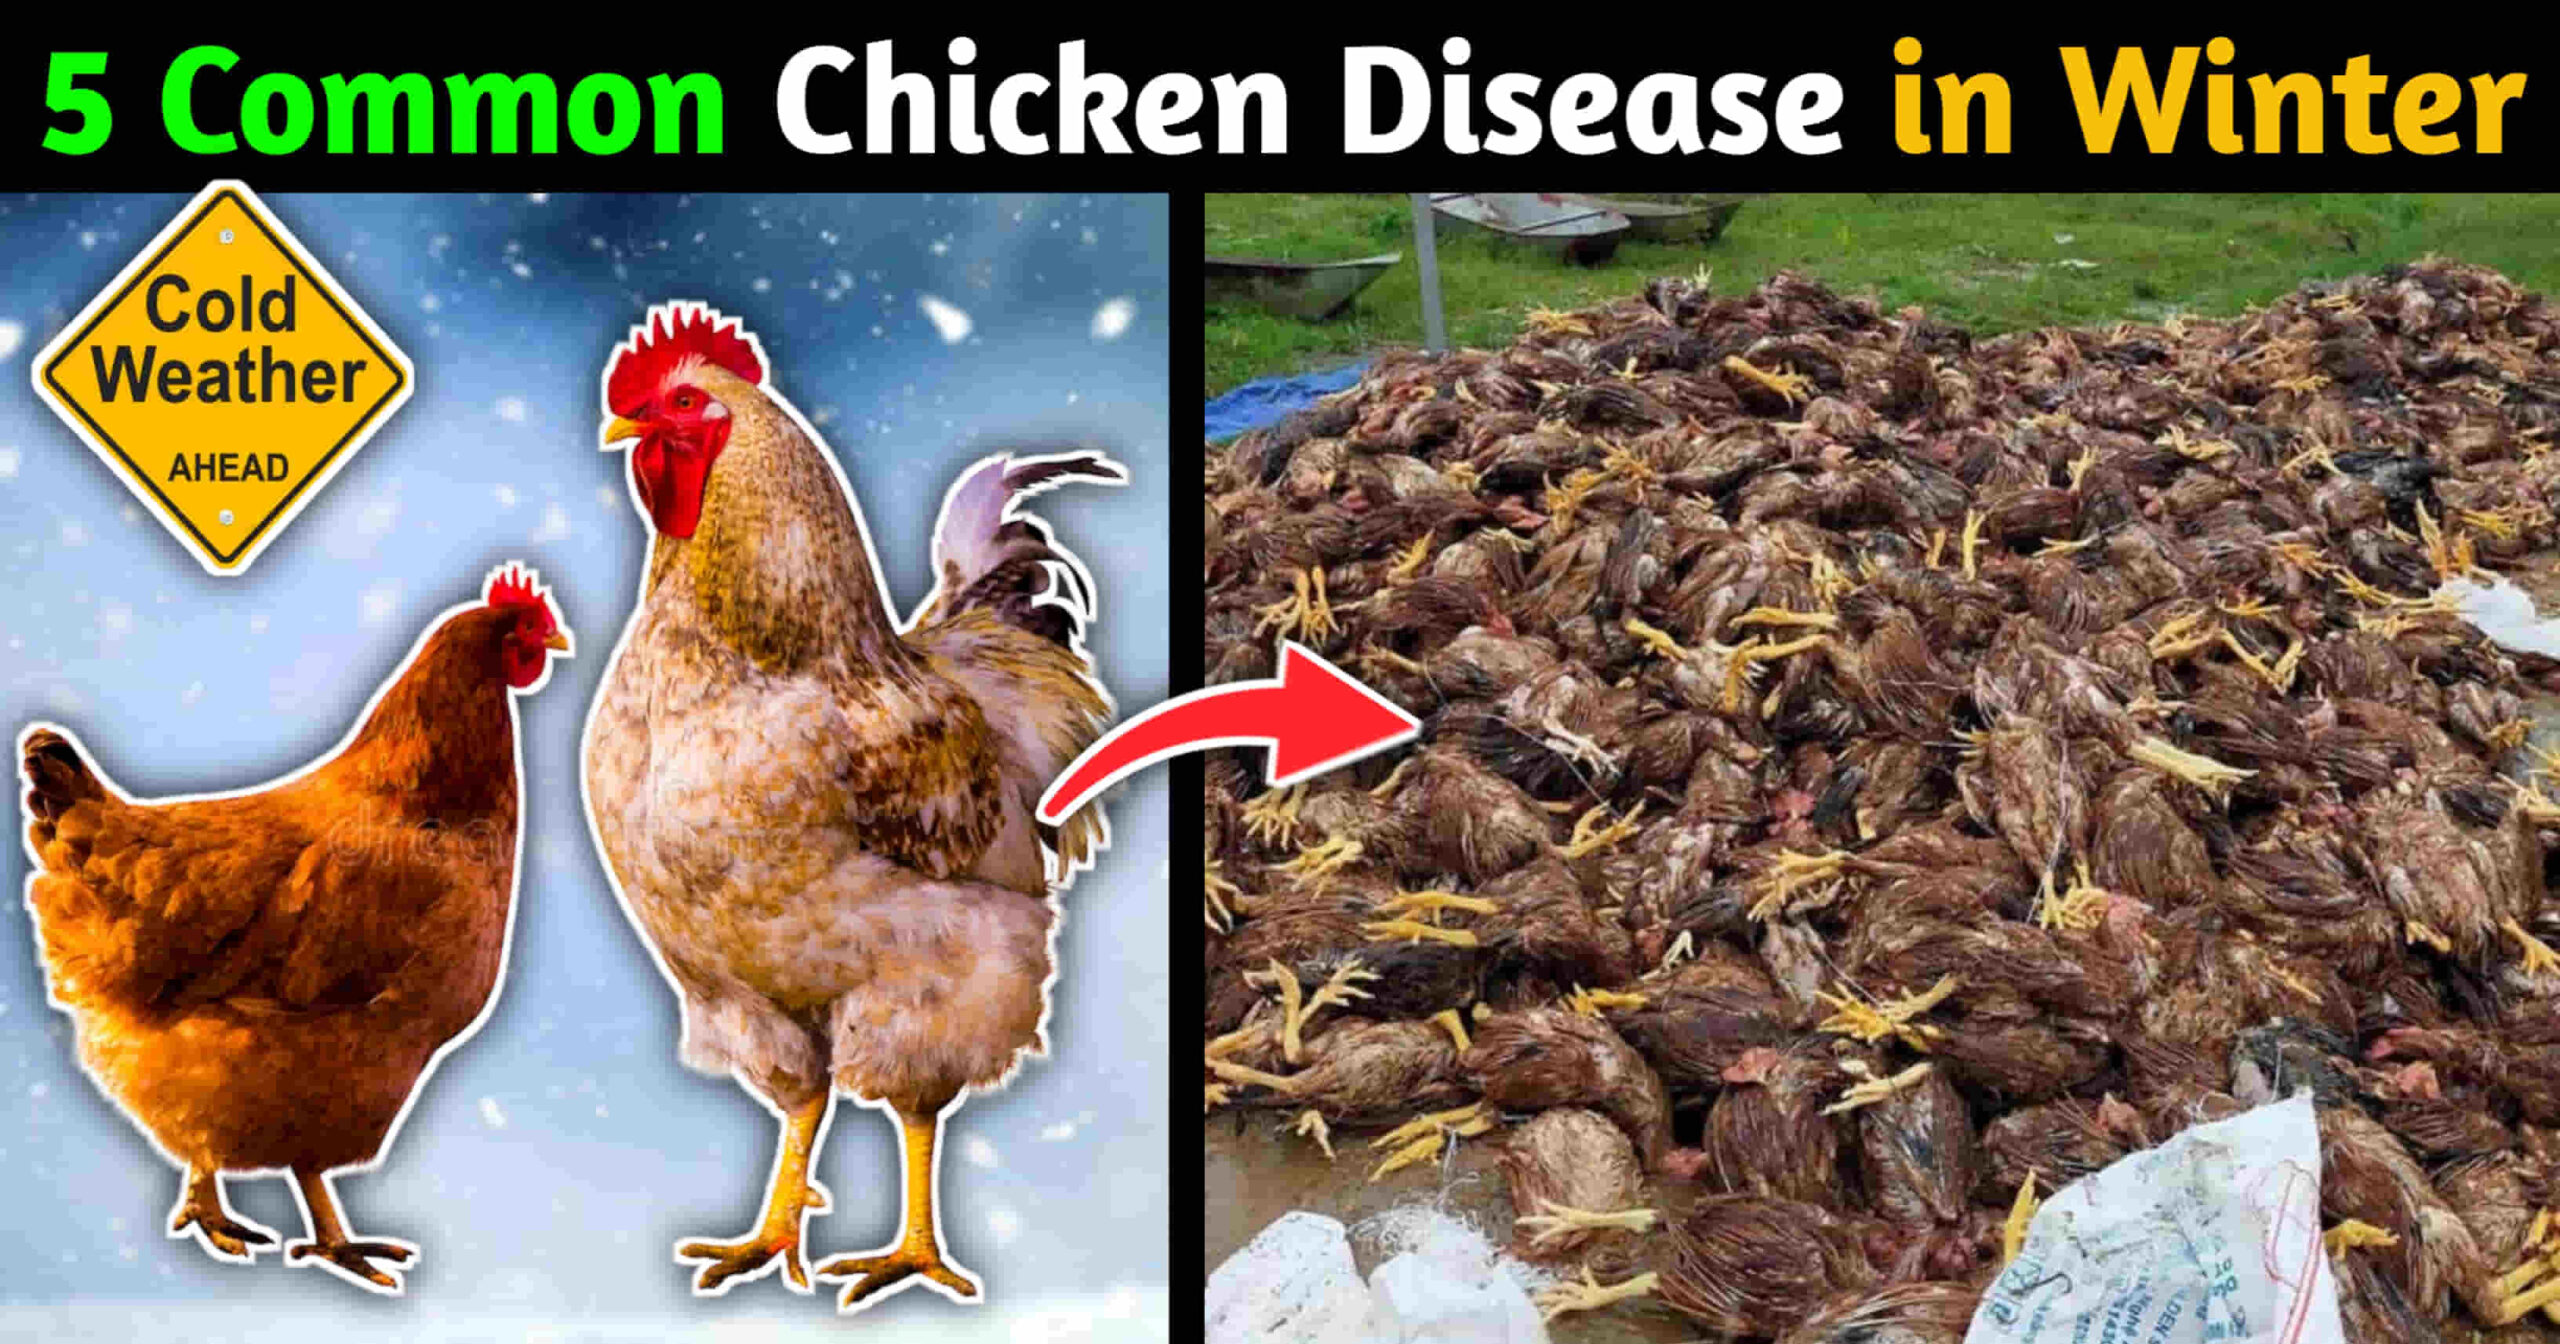 5 most common chicken diseases during winter season